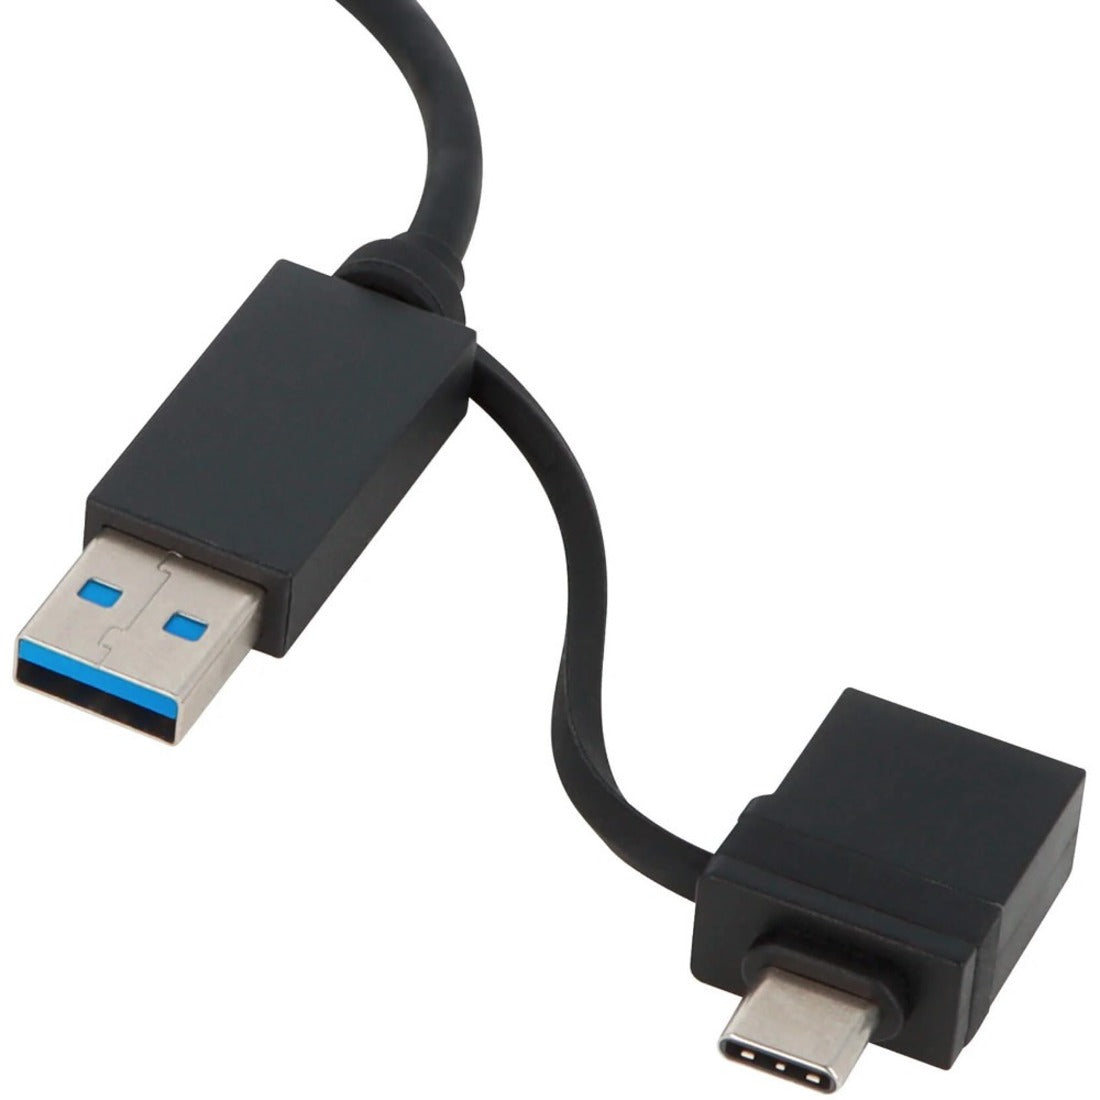 VisionTek 901506 VT90 USB 3.0 to HDMI Adapter, Plug and Play, 3840 x 2160 Resolution Supported